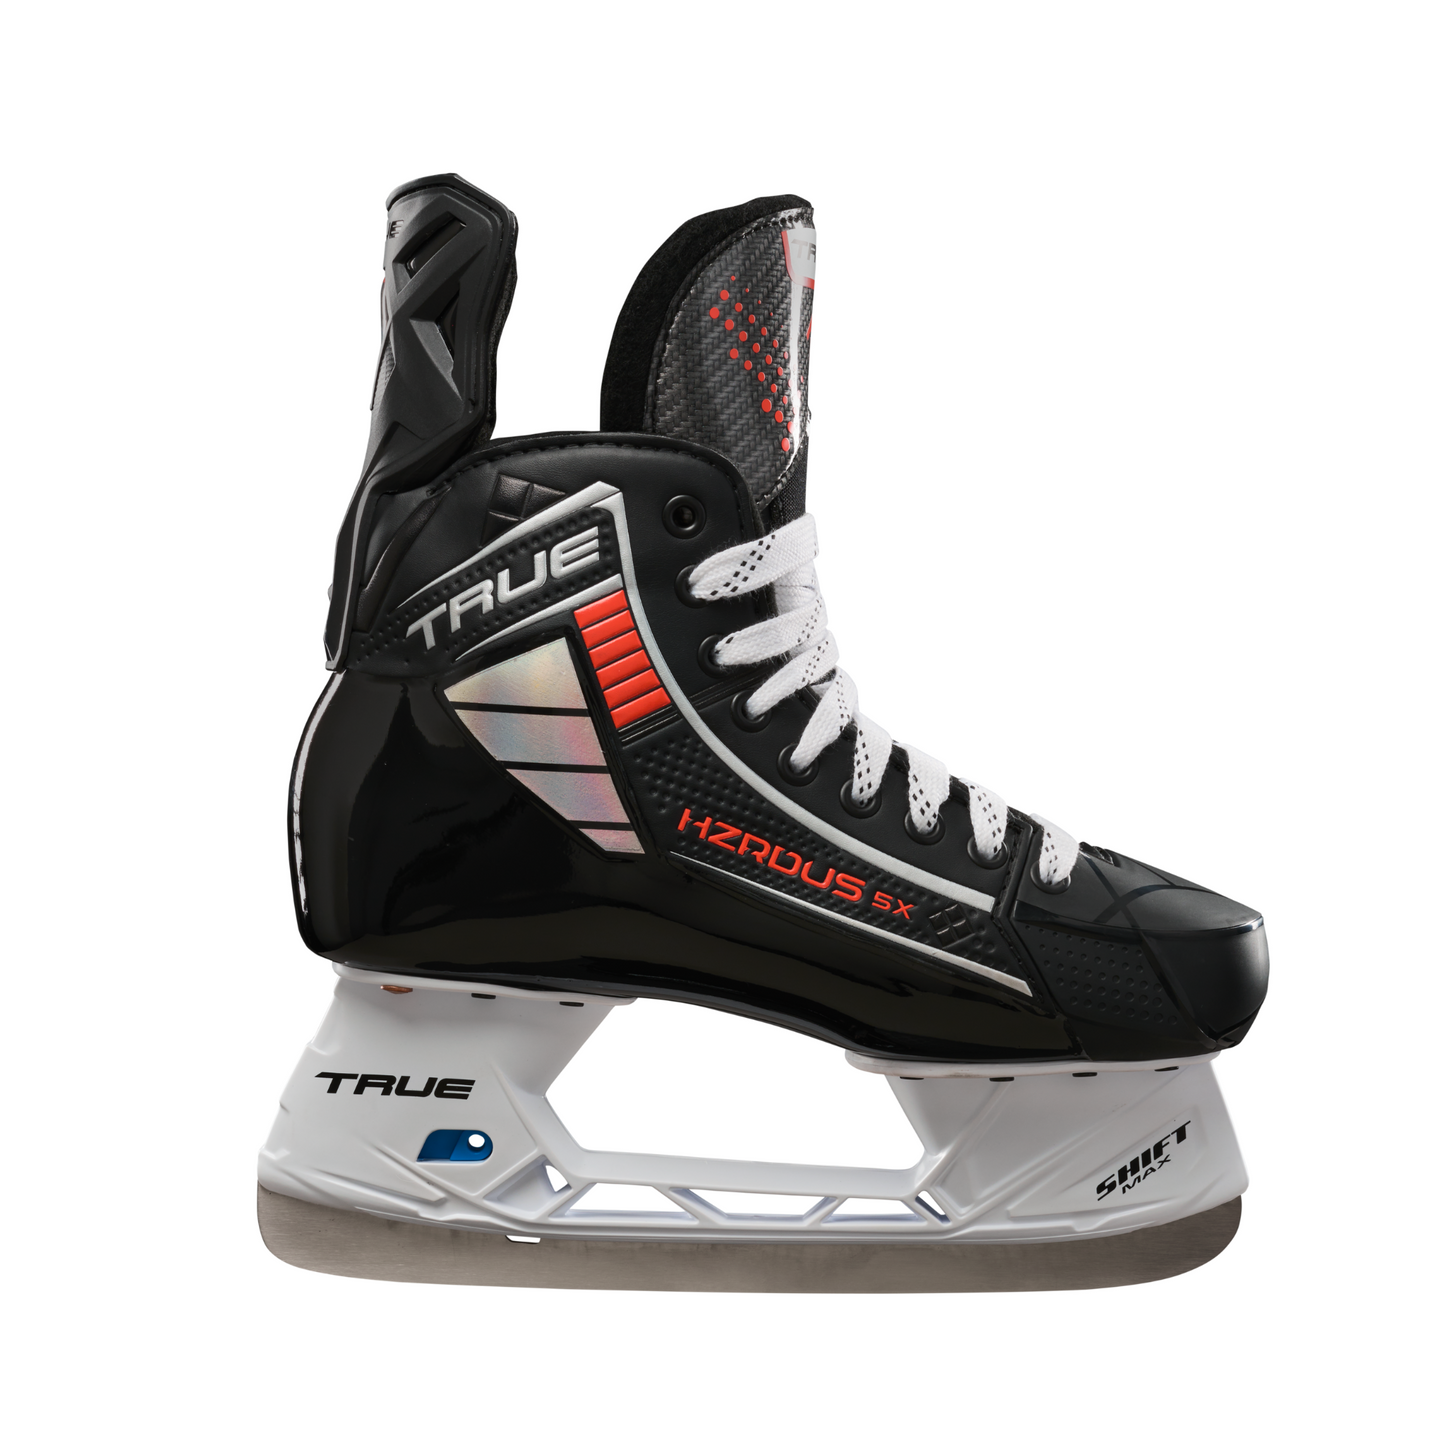 A photo of the True HZERDUS 5X Senior Hockey Skate in colour black and red side view.